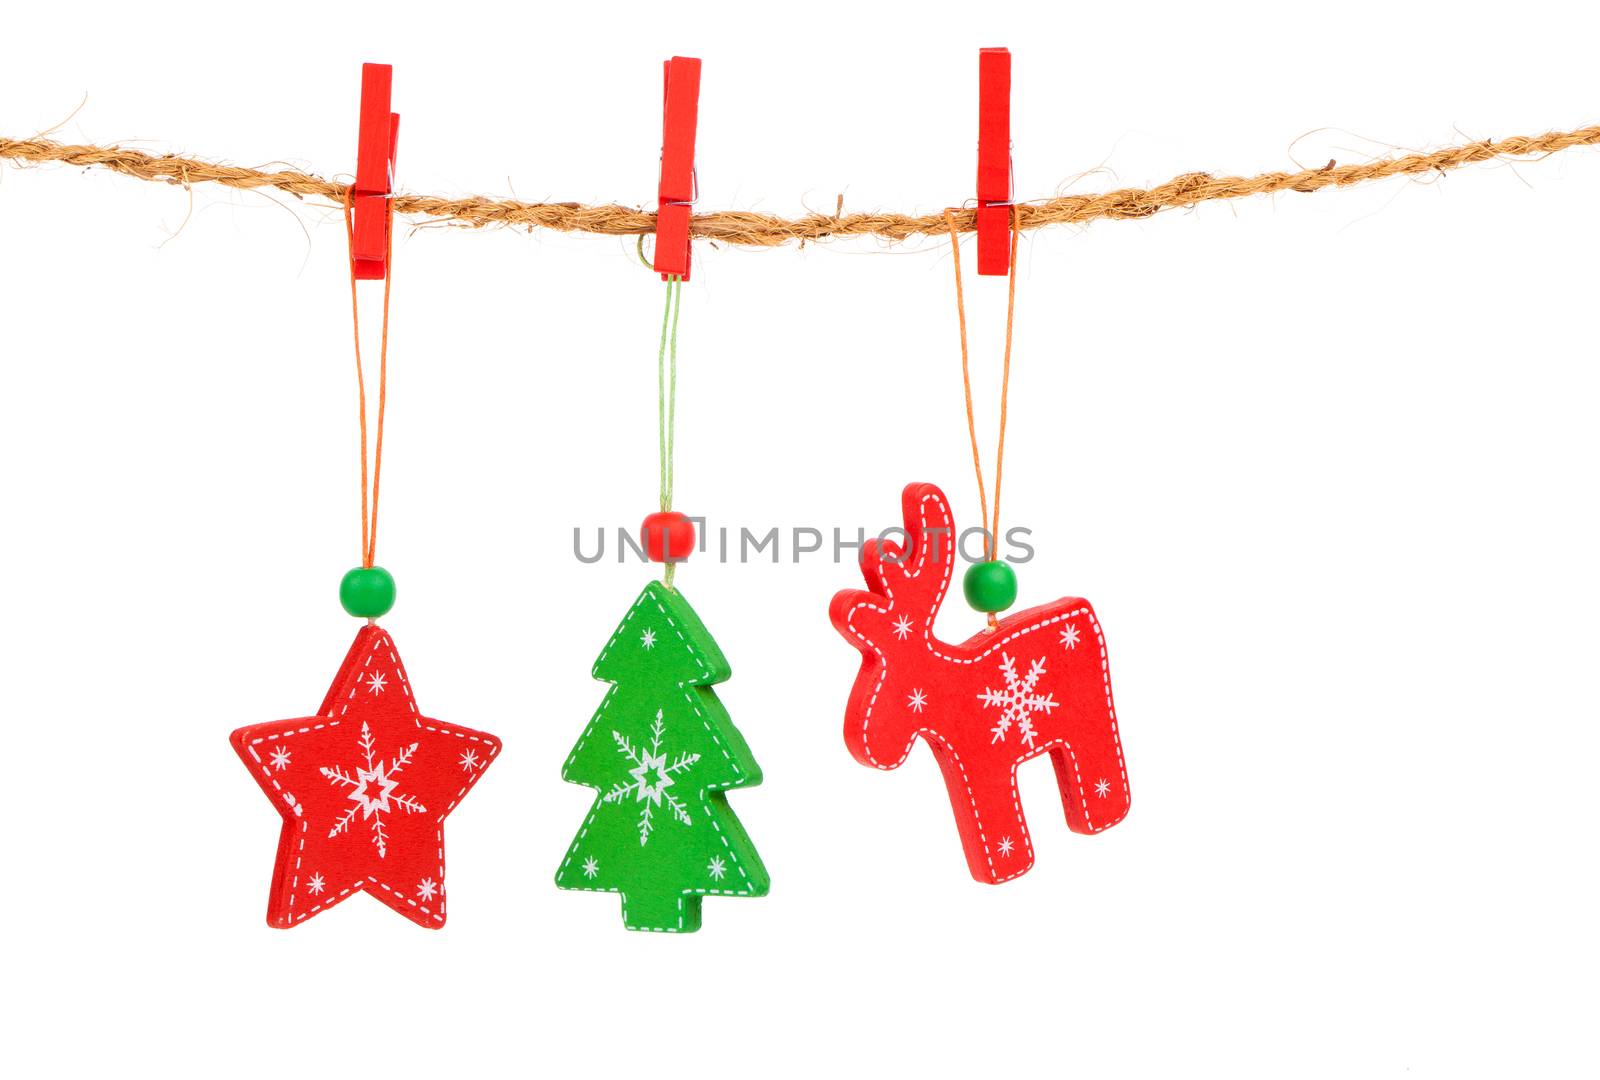 Christmas decorations hanging isolated on white background by motorolka